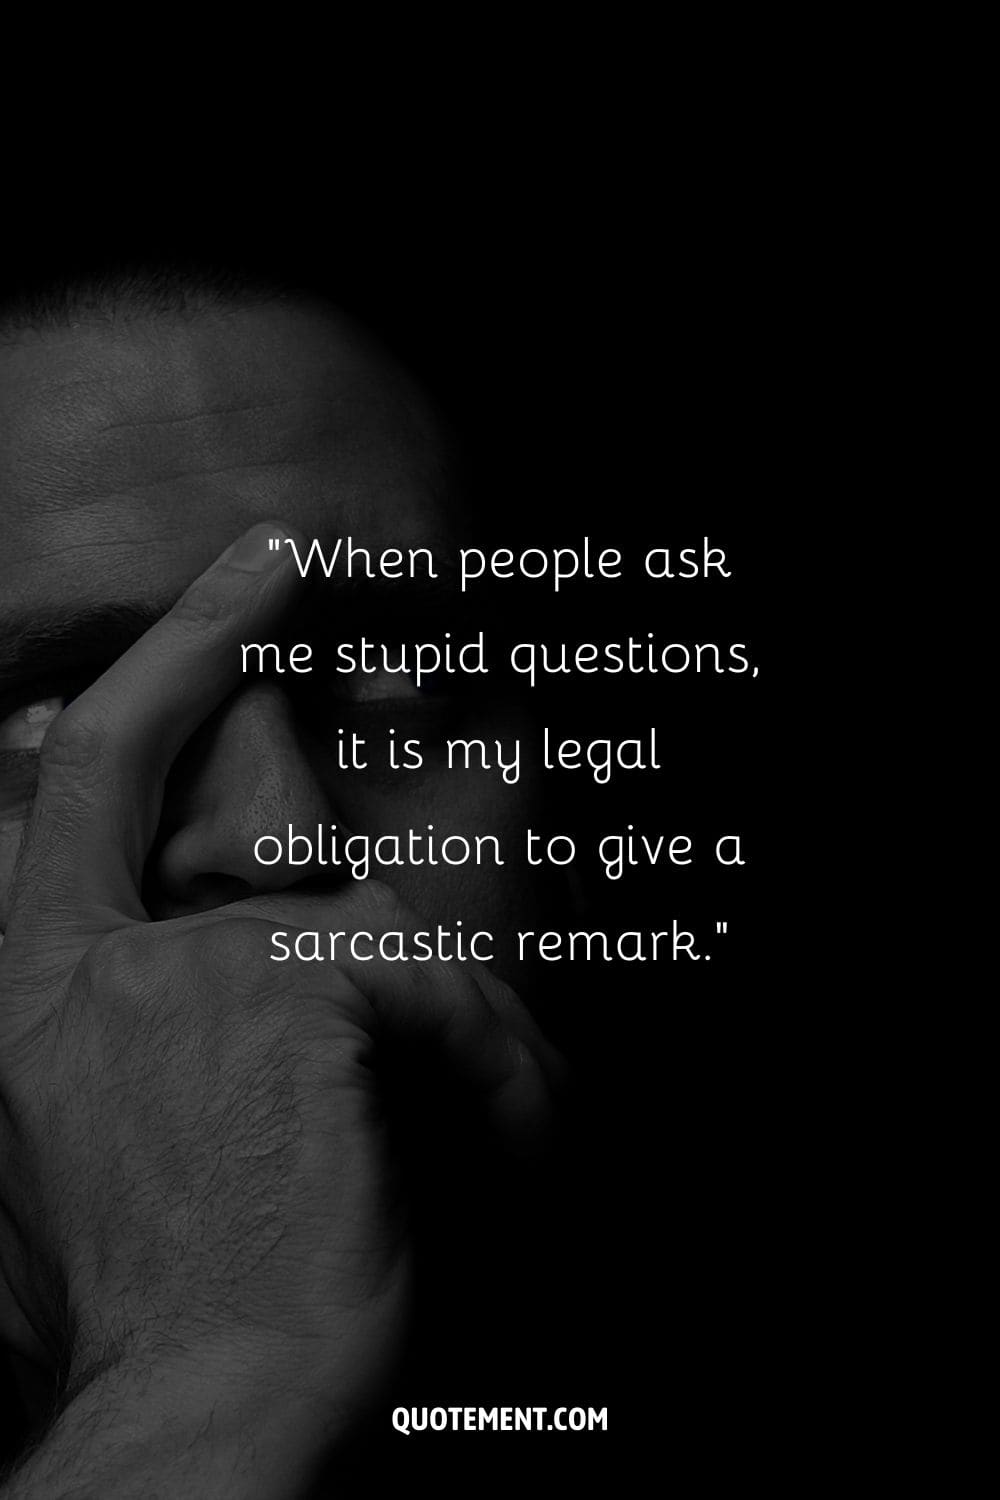 “When people ask me stupid questions, it is my legal obligation to give a sarcastic remark.” ― Unknown